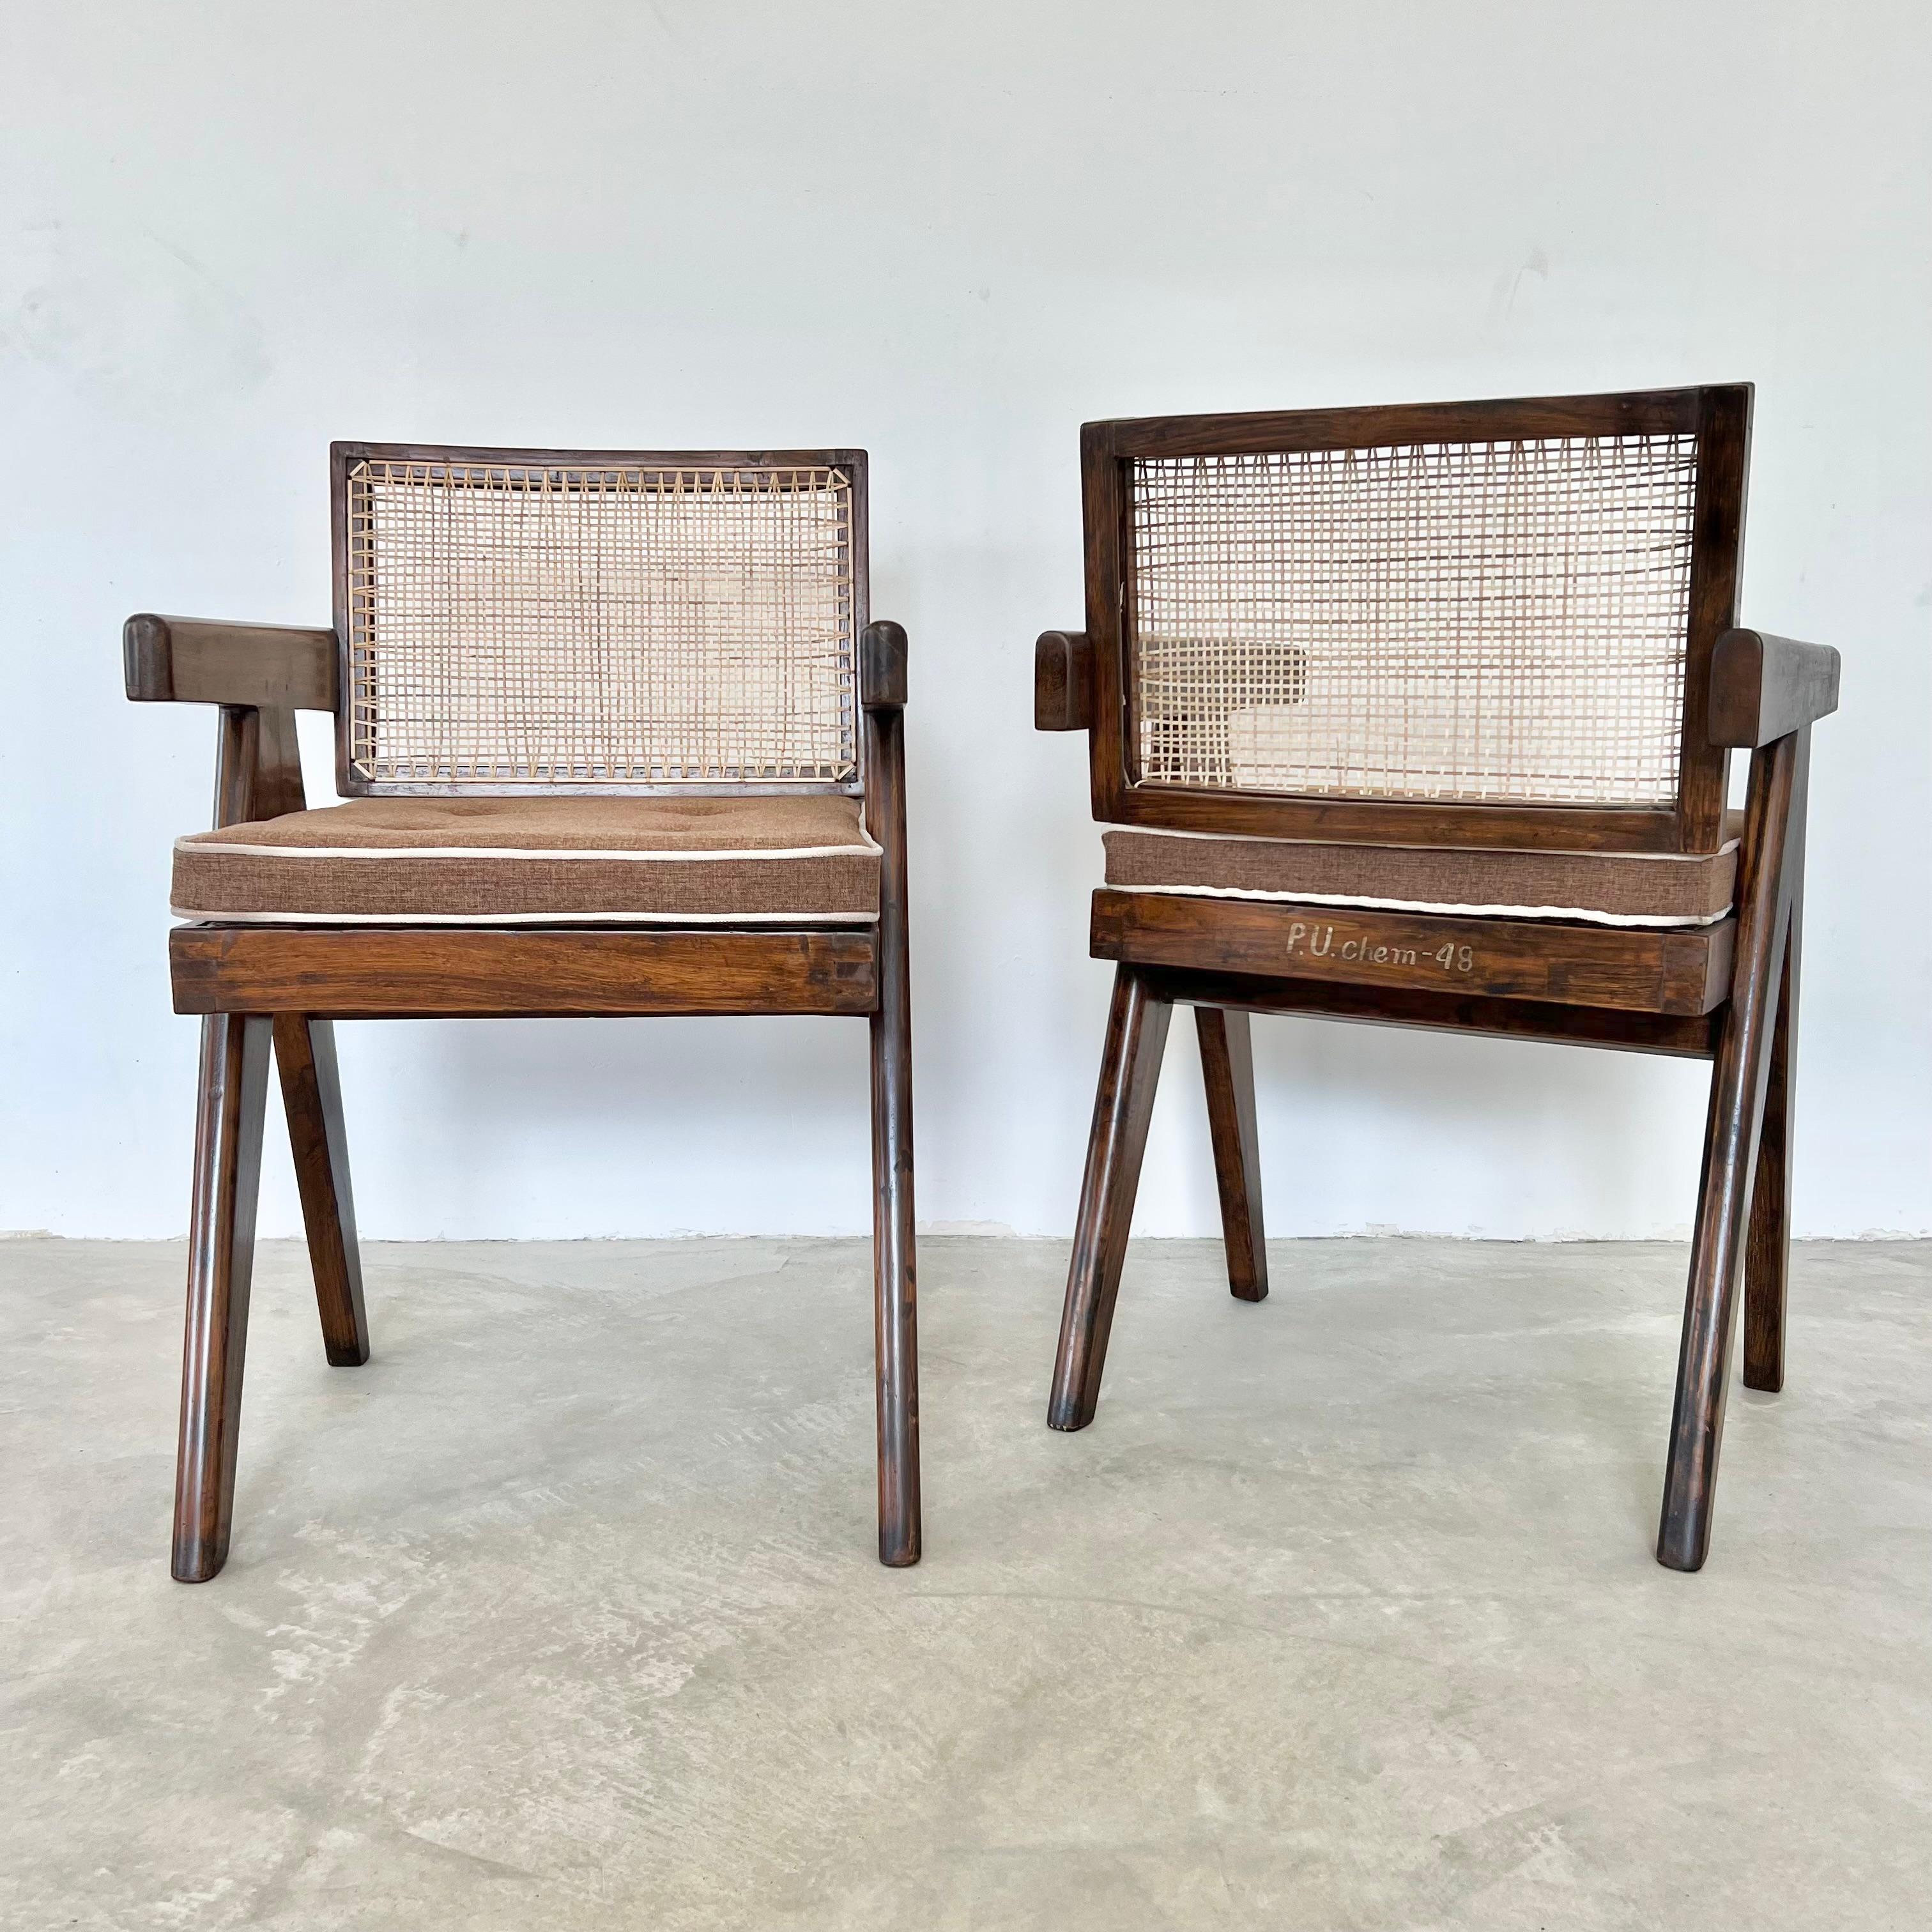 Pierre Jeanneret Office Chairs, 1950s Chandigargh For Sale 3